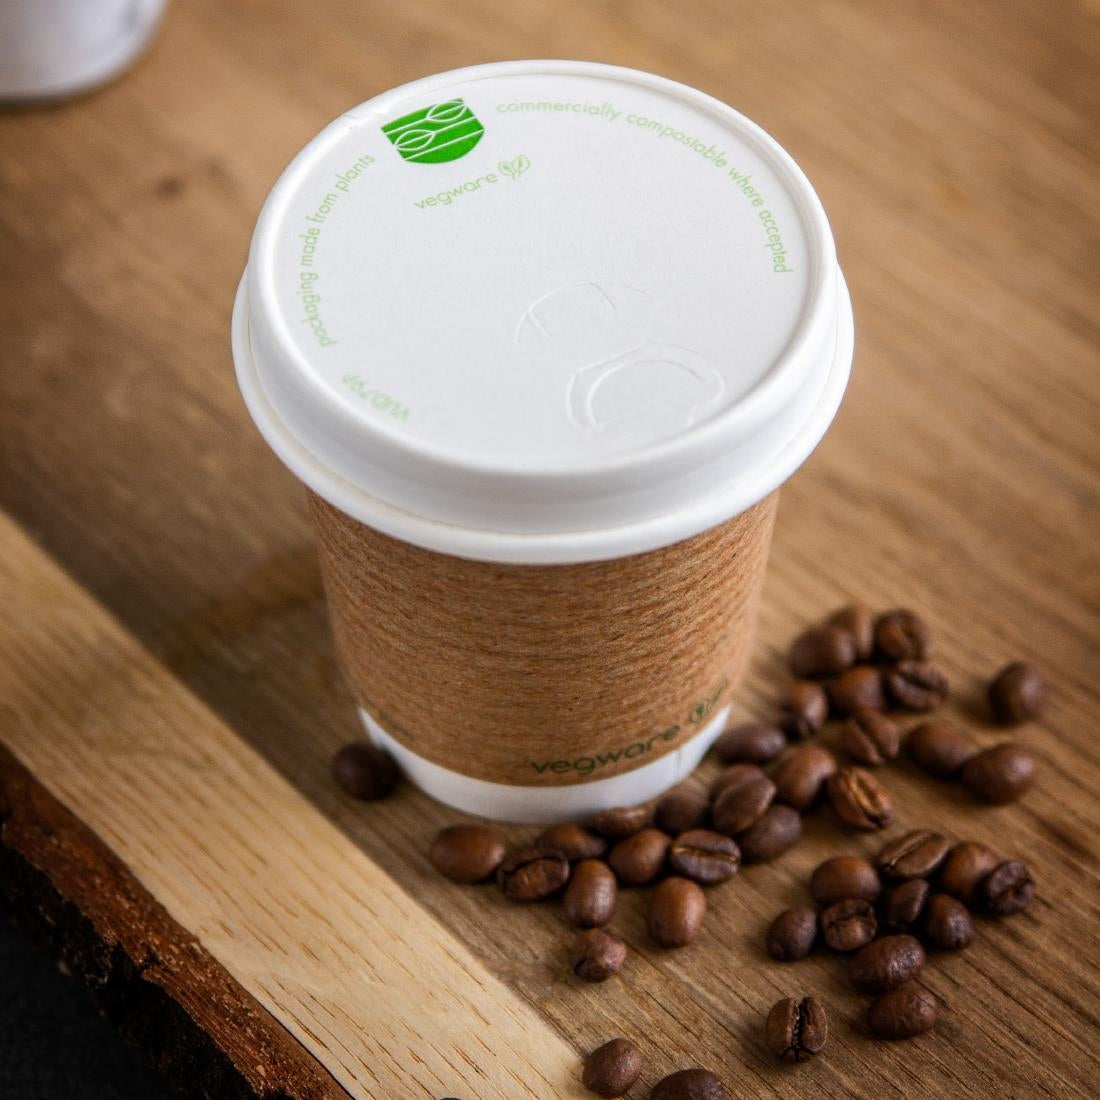 CF888 Vegware Compostable 79-Series Paper Hot Cup Lid (Pack of 1000) JD Catering Equipment Solutions Ltd